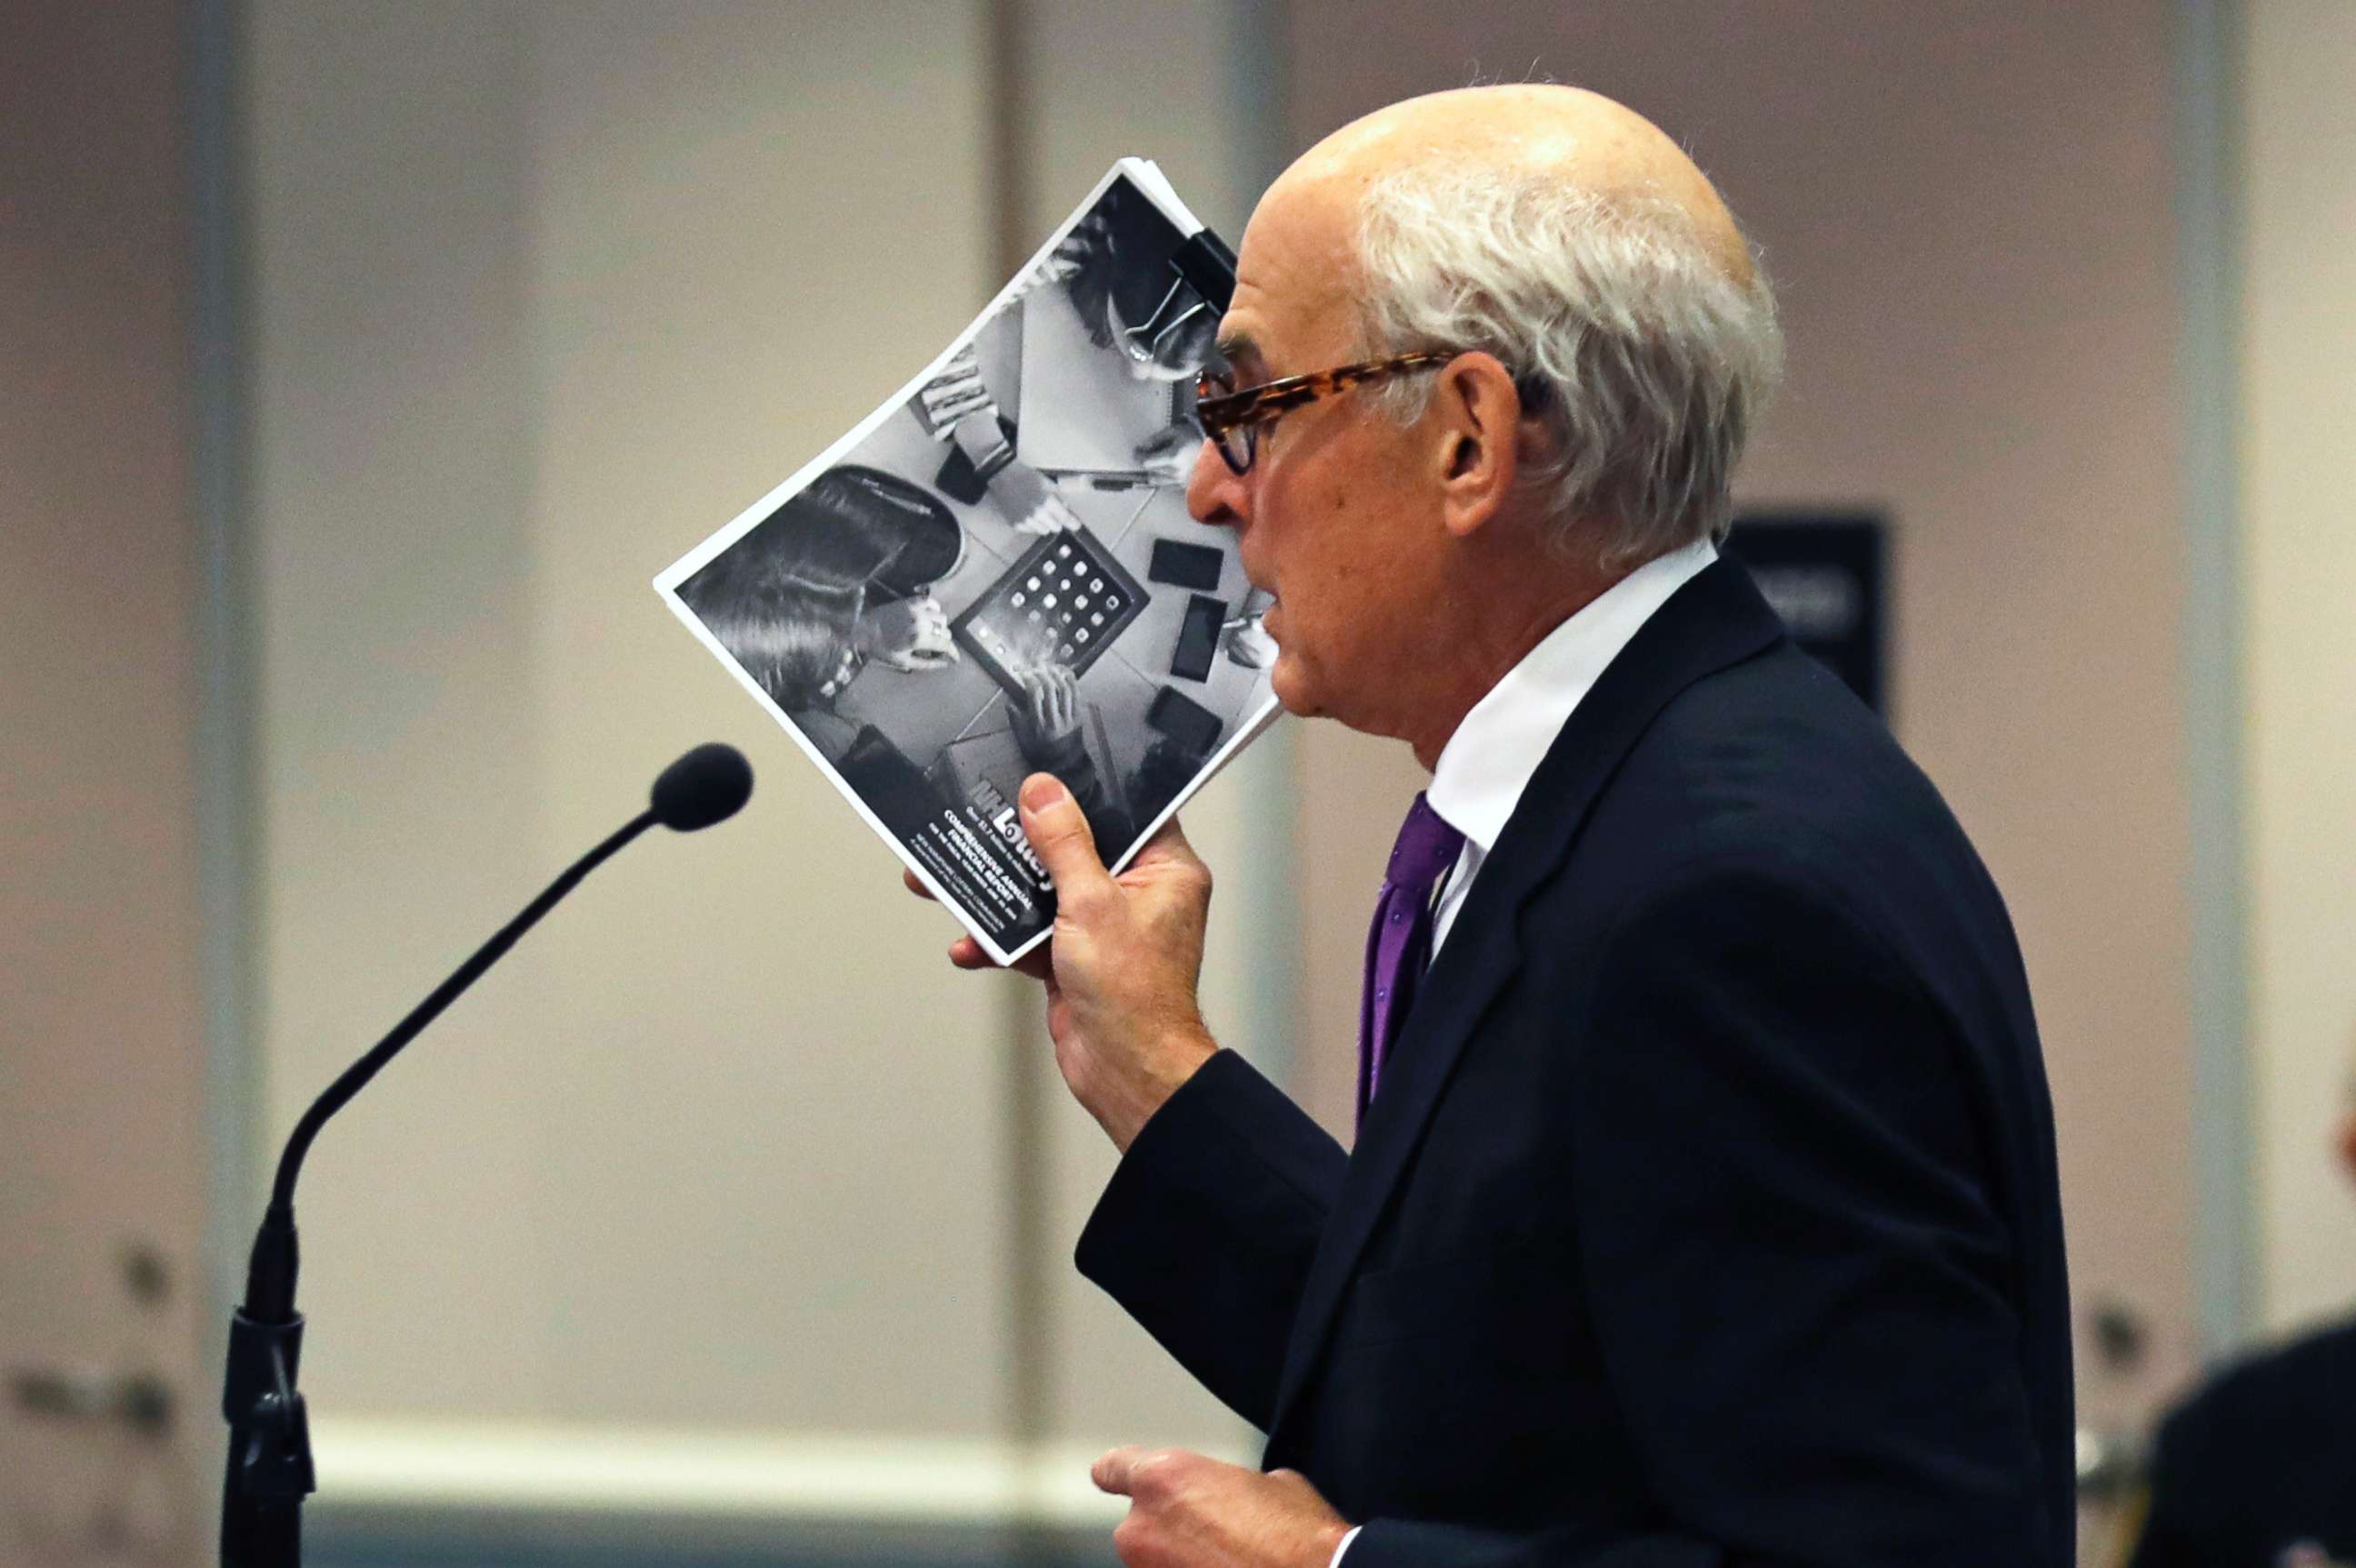 PHOTO: Attorney Steven M. Gordon, who represents lottery winner "Jane Doe", holds up an annual report from the New Hampshire Lottery during a hearing in the Jane Doe v. NH Lottery Commission case in Nashua, N.H., Feb. 13, 2018. 